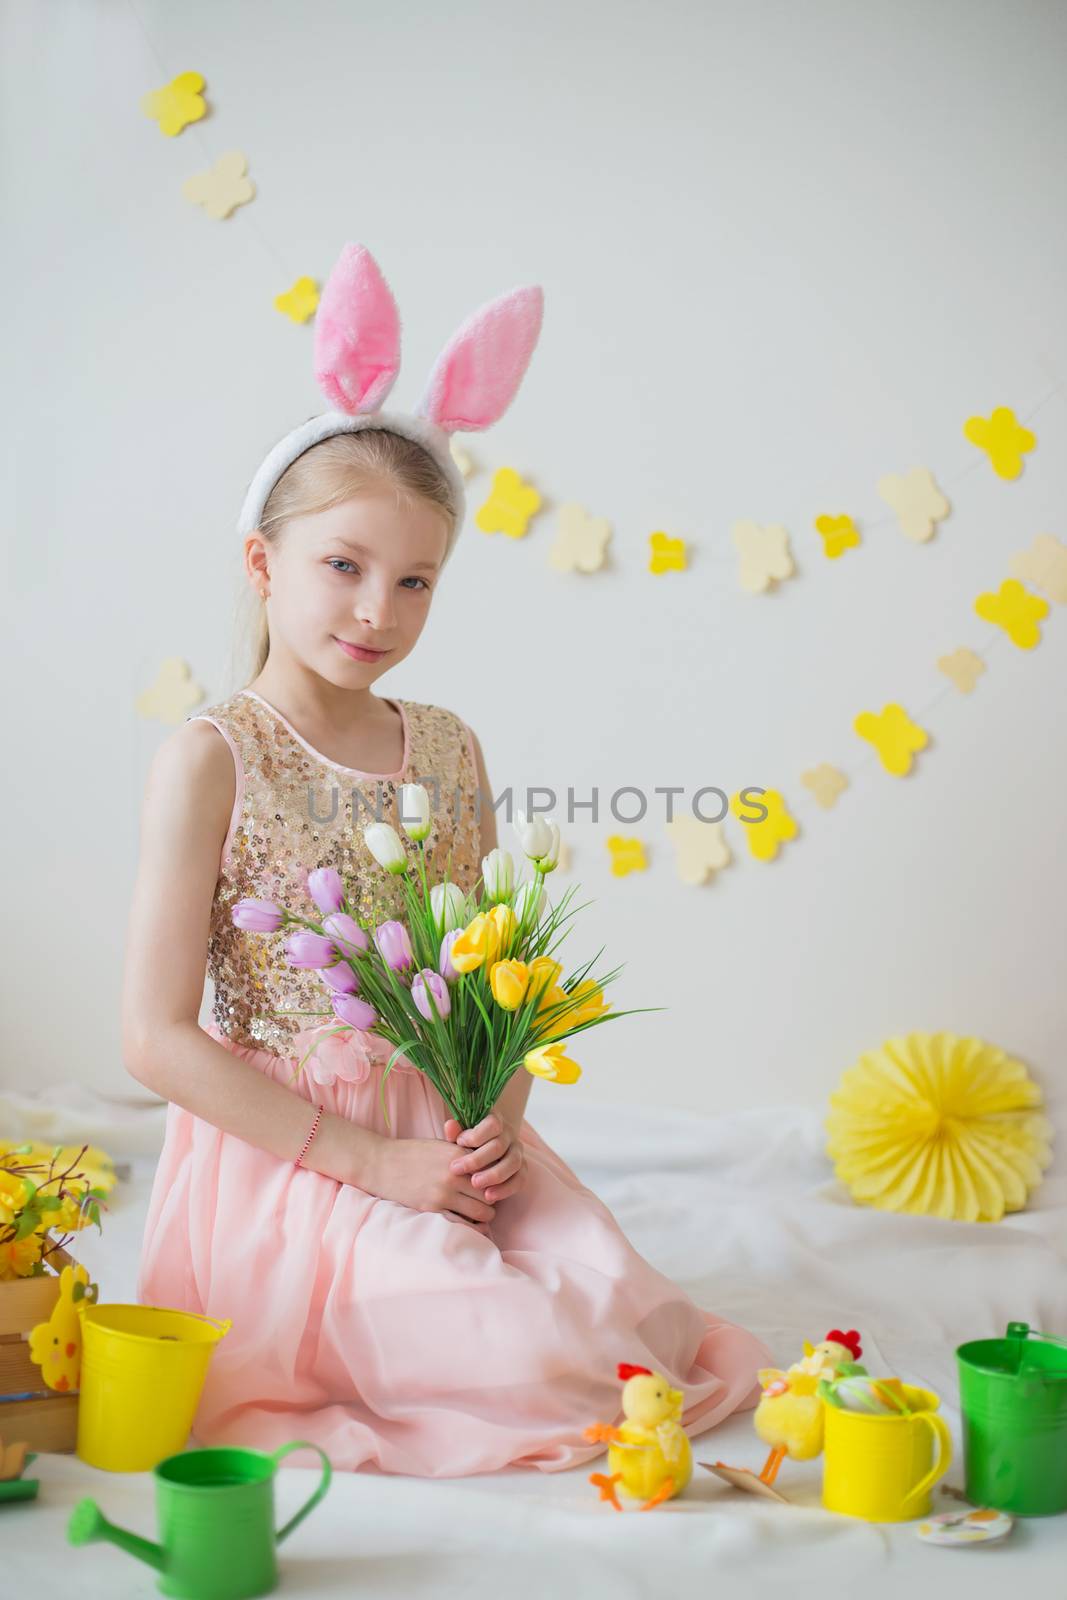 Пirl with bunny ears painting eggs, Easter decoration by Angel_a